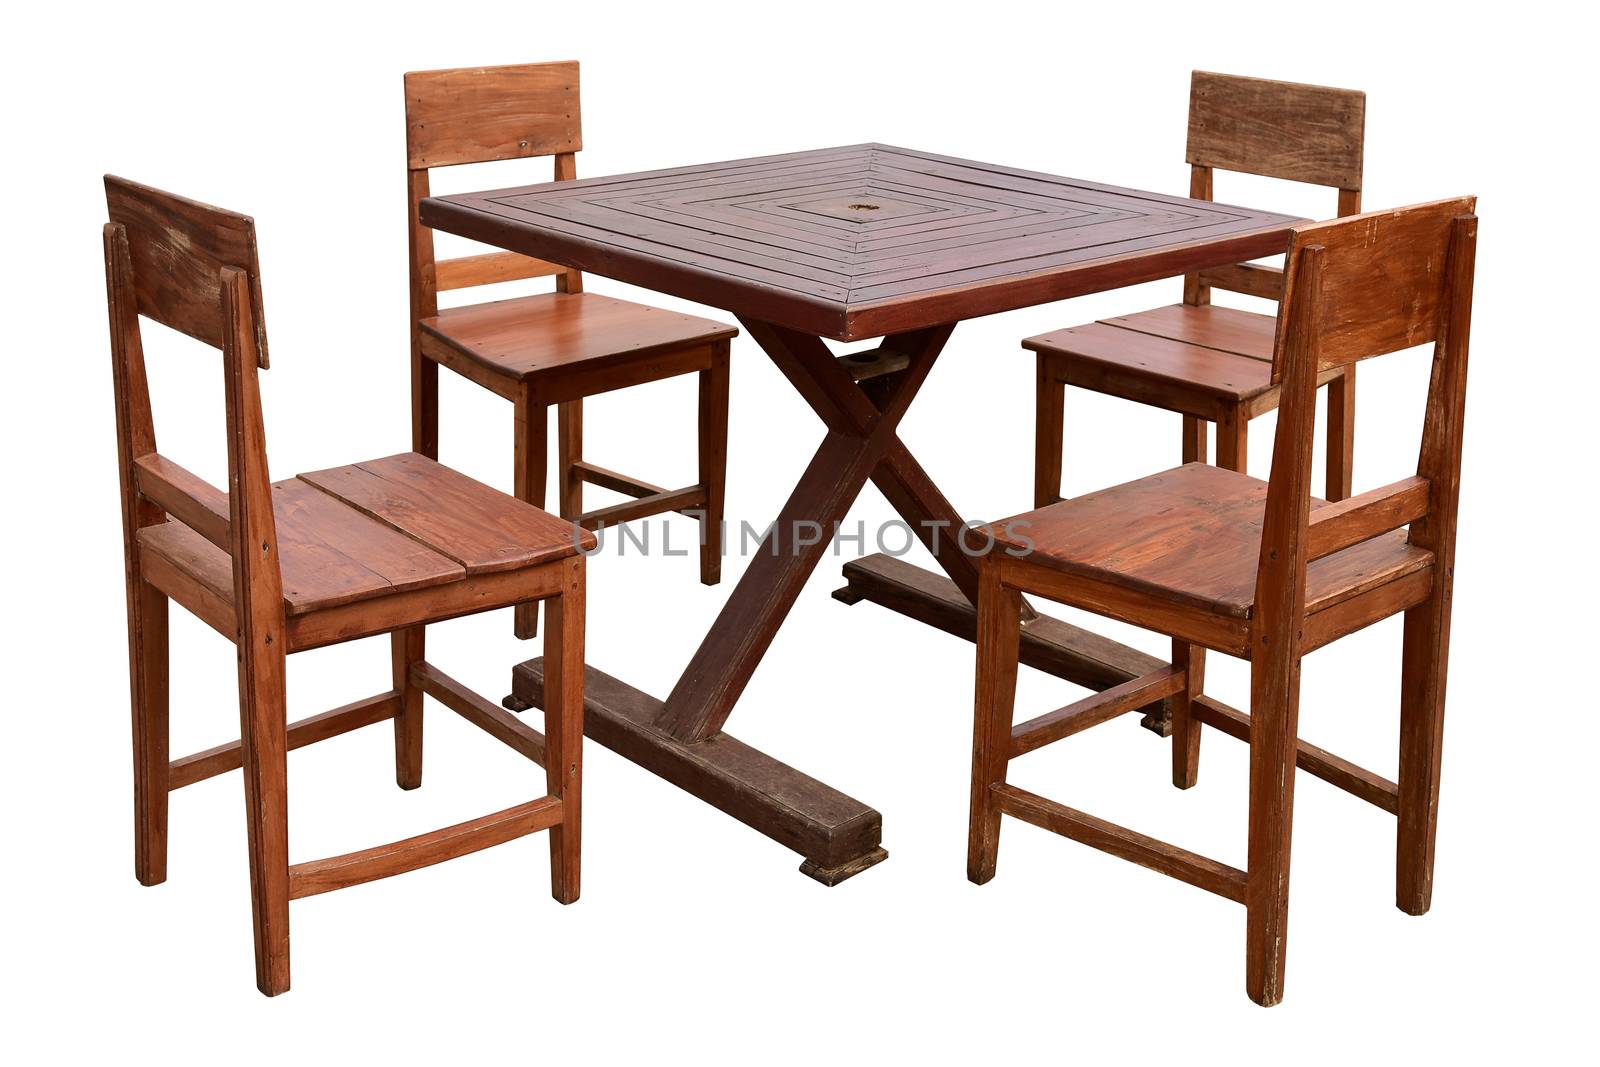 Wooden dining table and chairs isolated. by NuwatPhoto